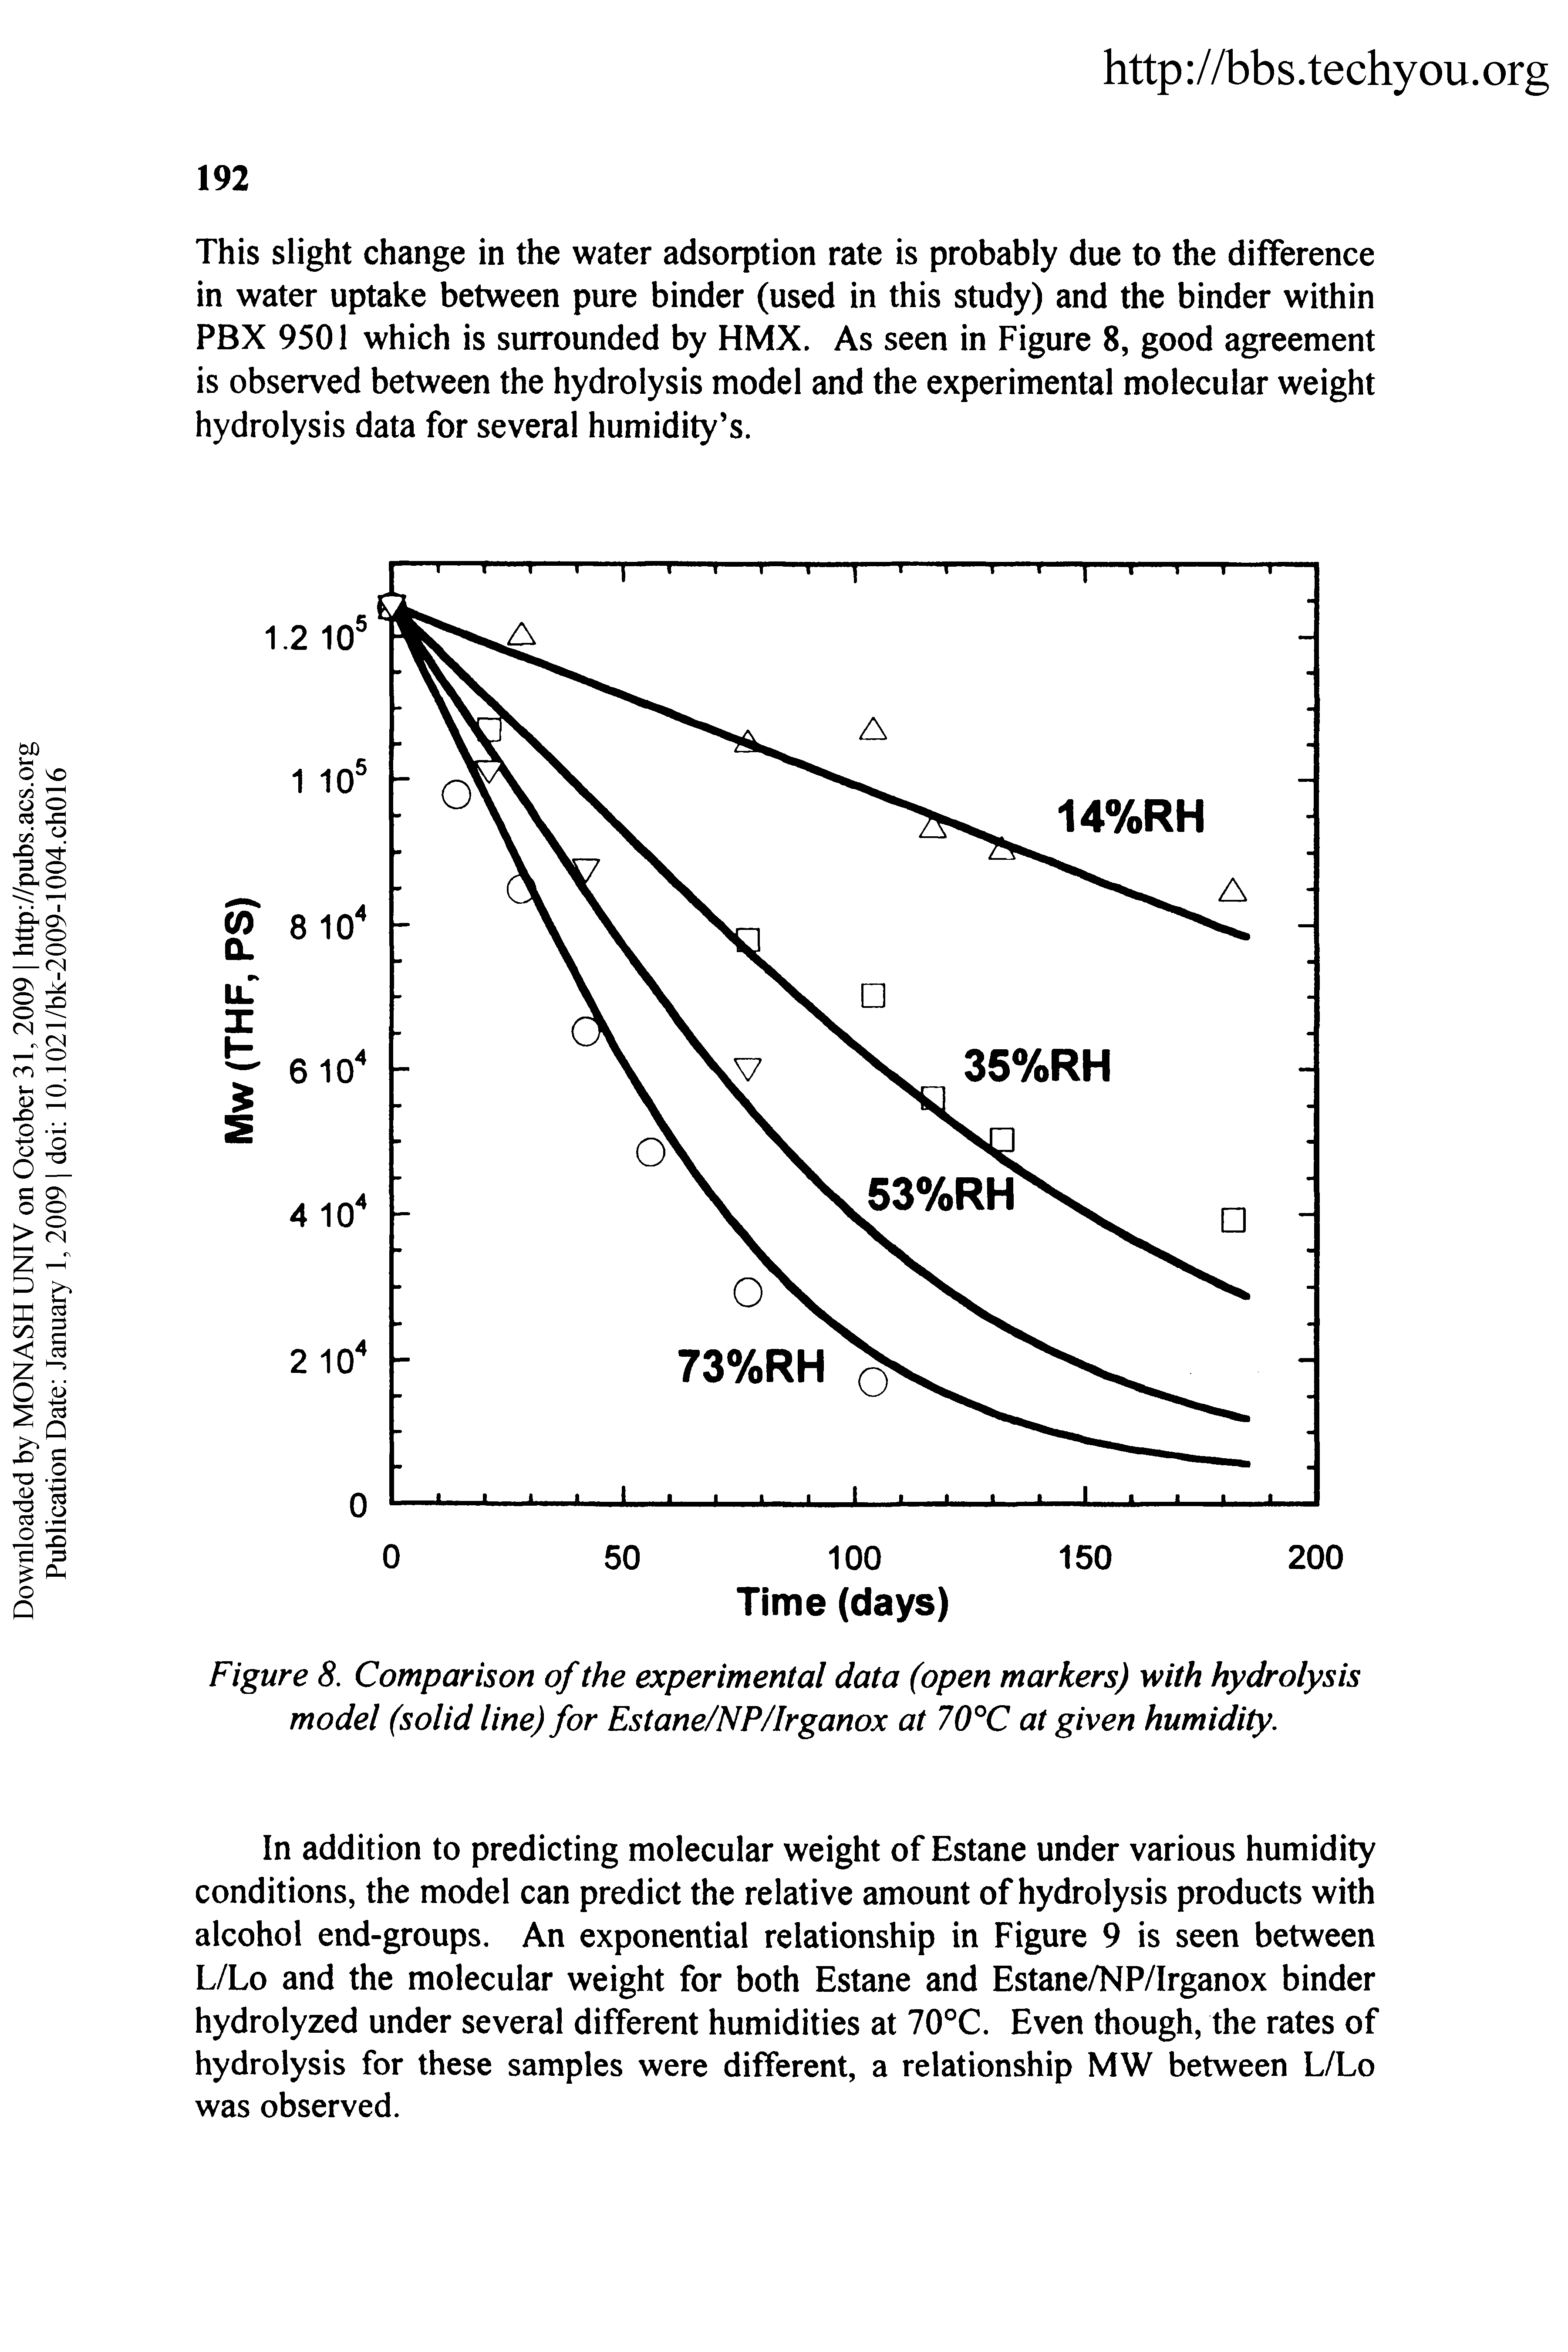 Figure 8. Comparison of the experimental data (open markers) with hydrolysis model (solid line) for Estane/NP/Irganox at 70°C at given humidity.